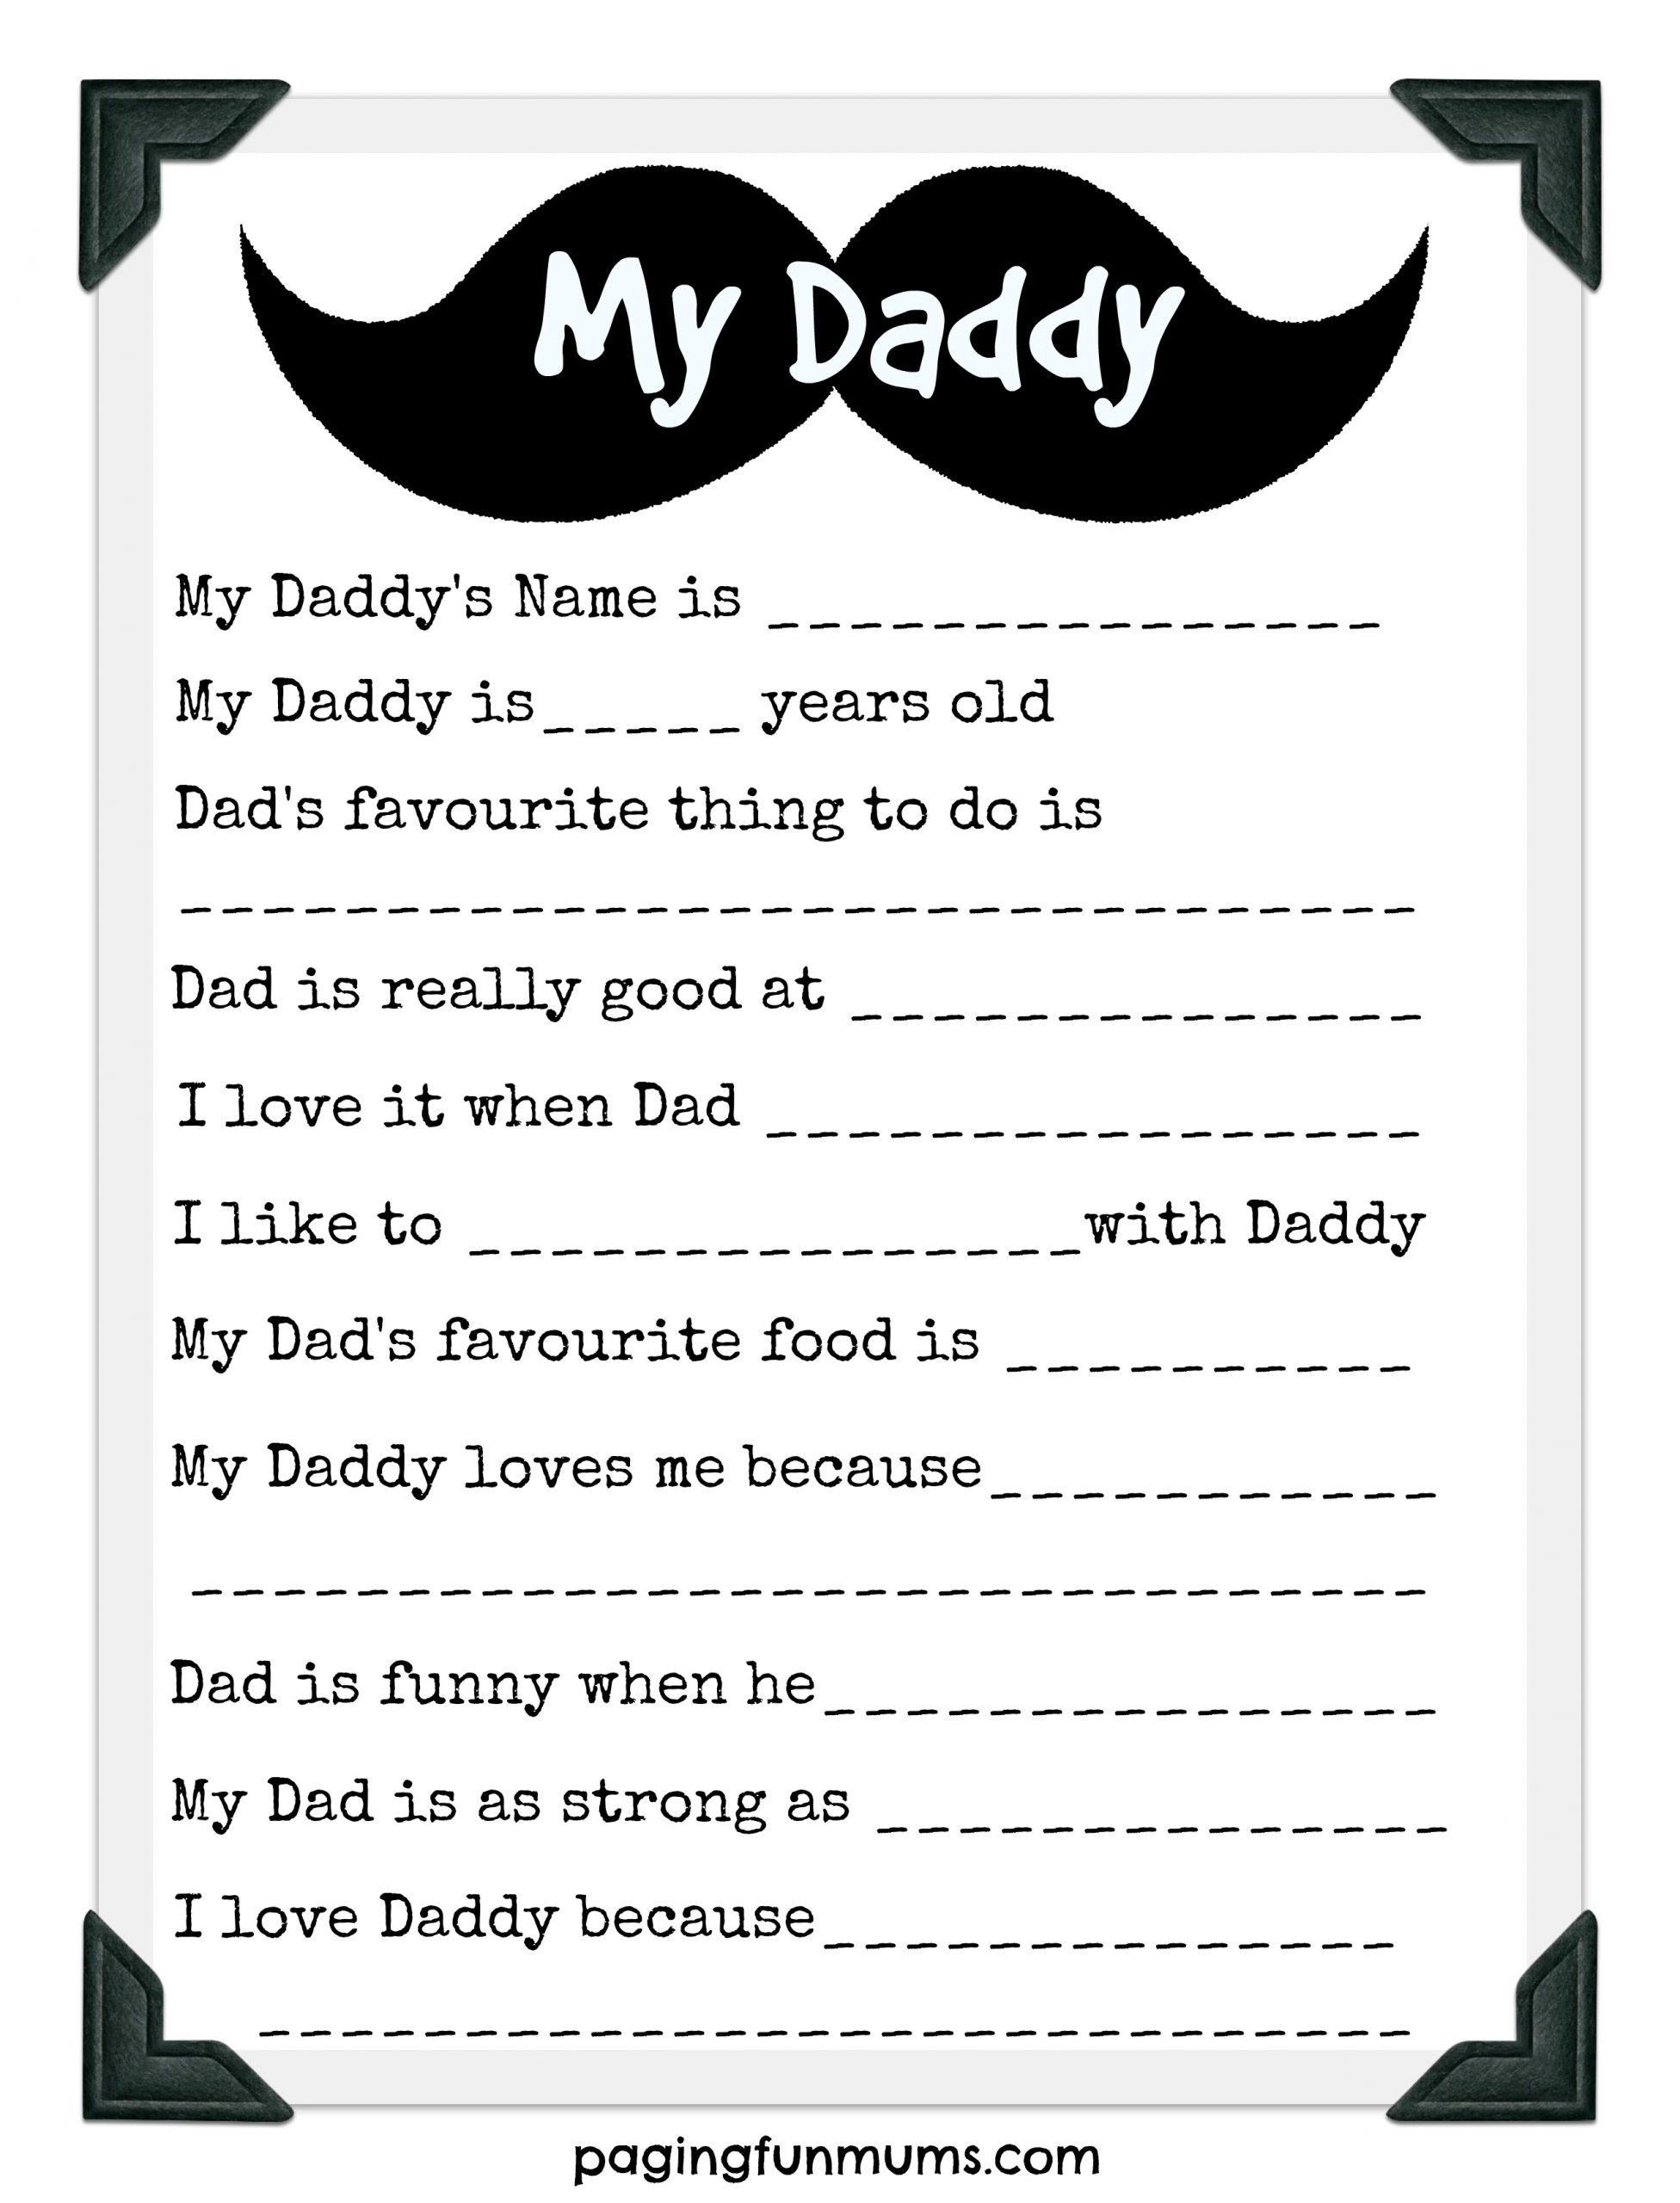 father-s-day-questionnaire-printable-2022-free-download